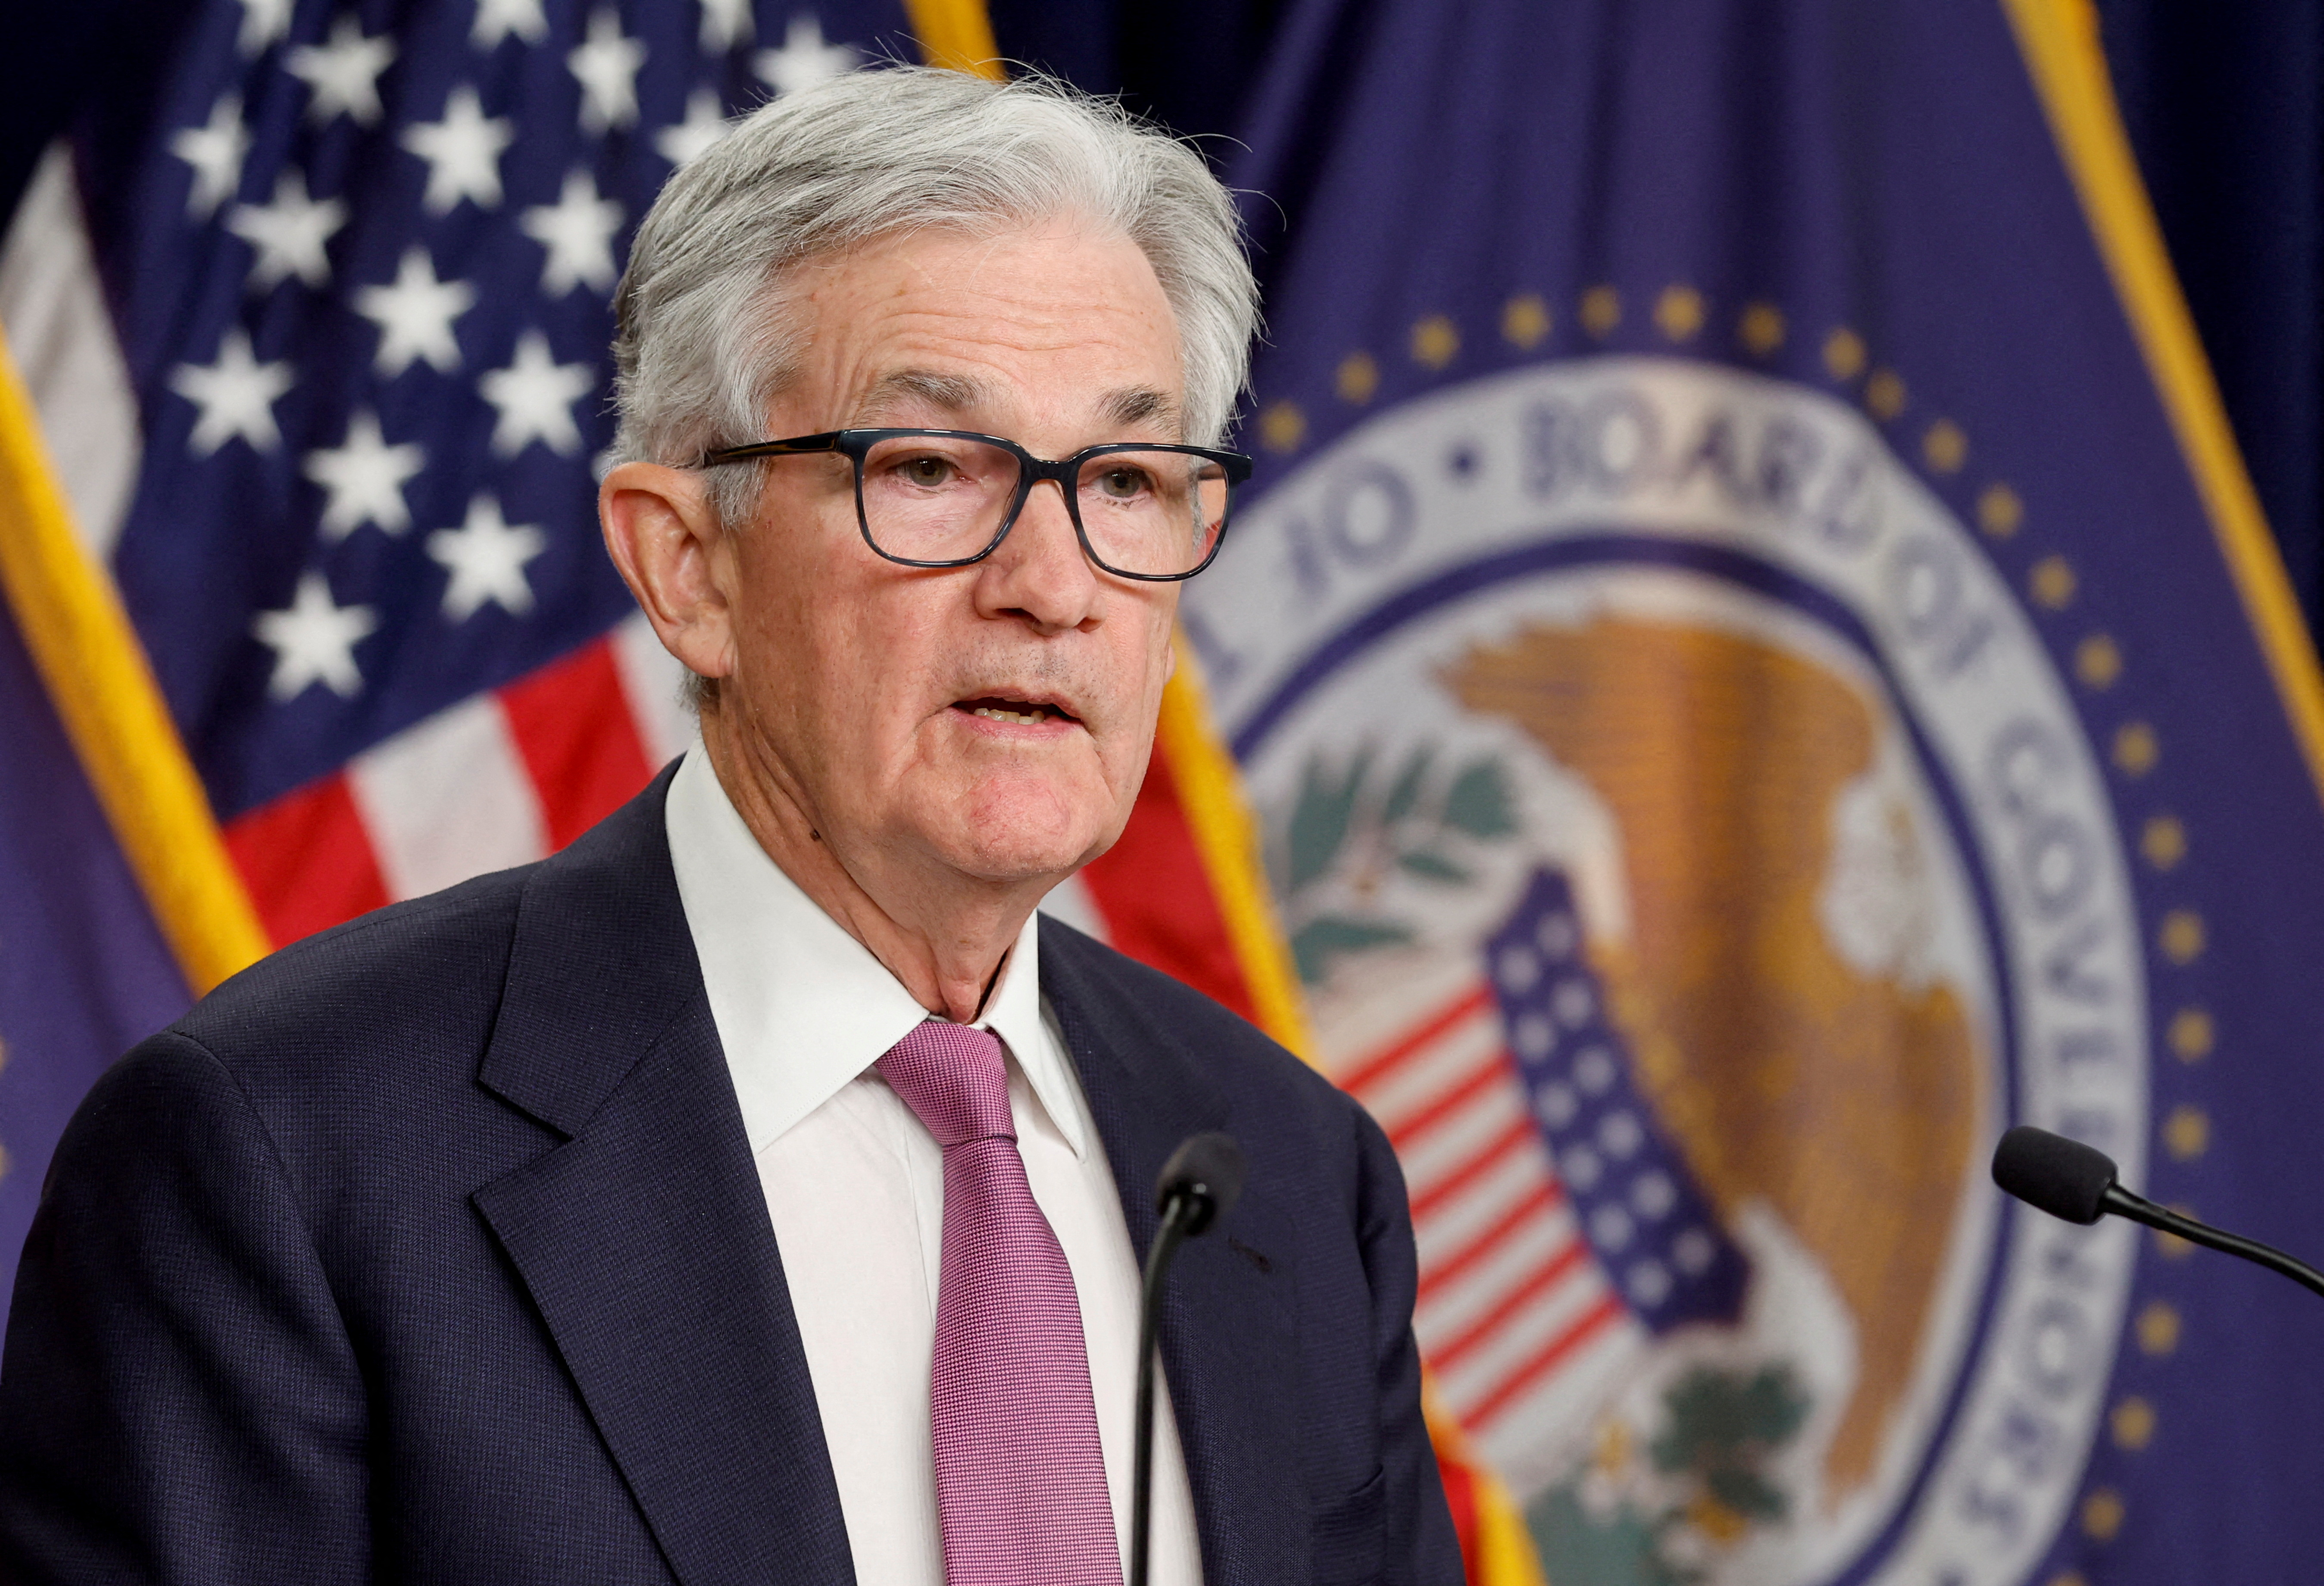 U.S. Federal Reserve Chair Powell holds news conference in Washington